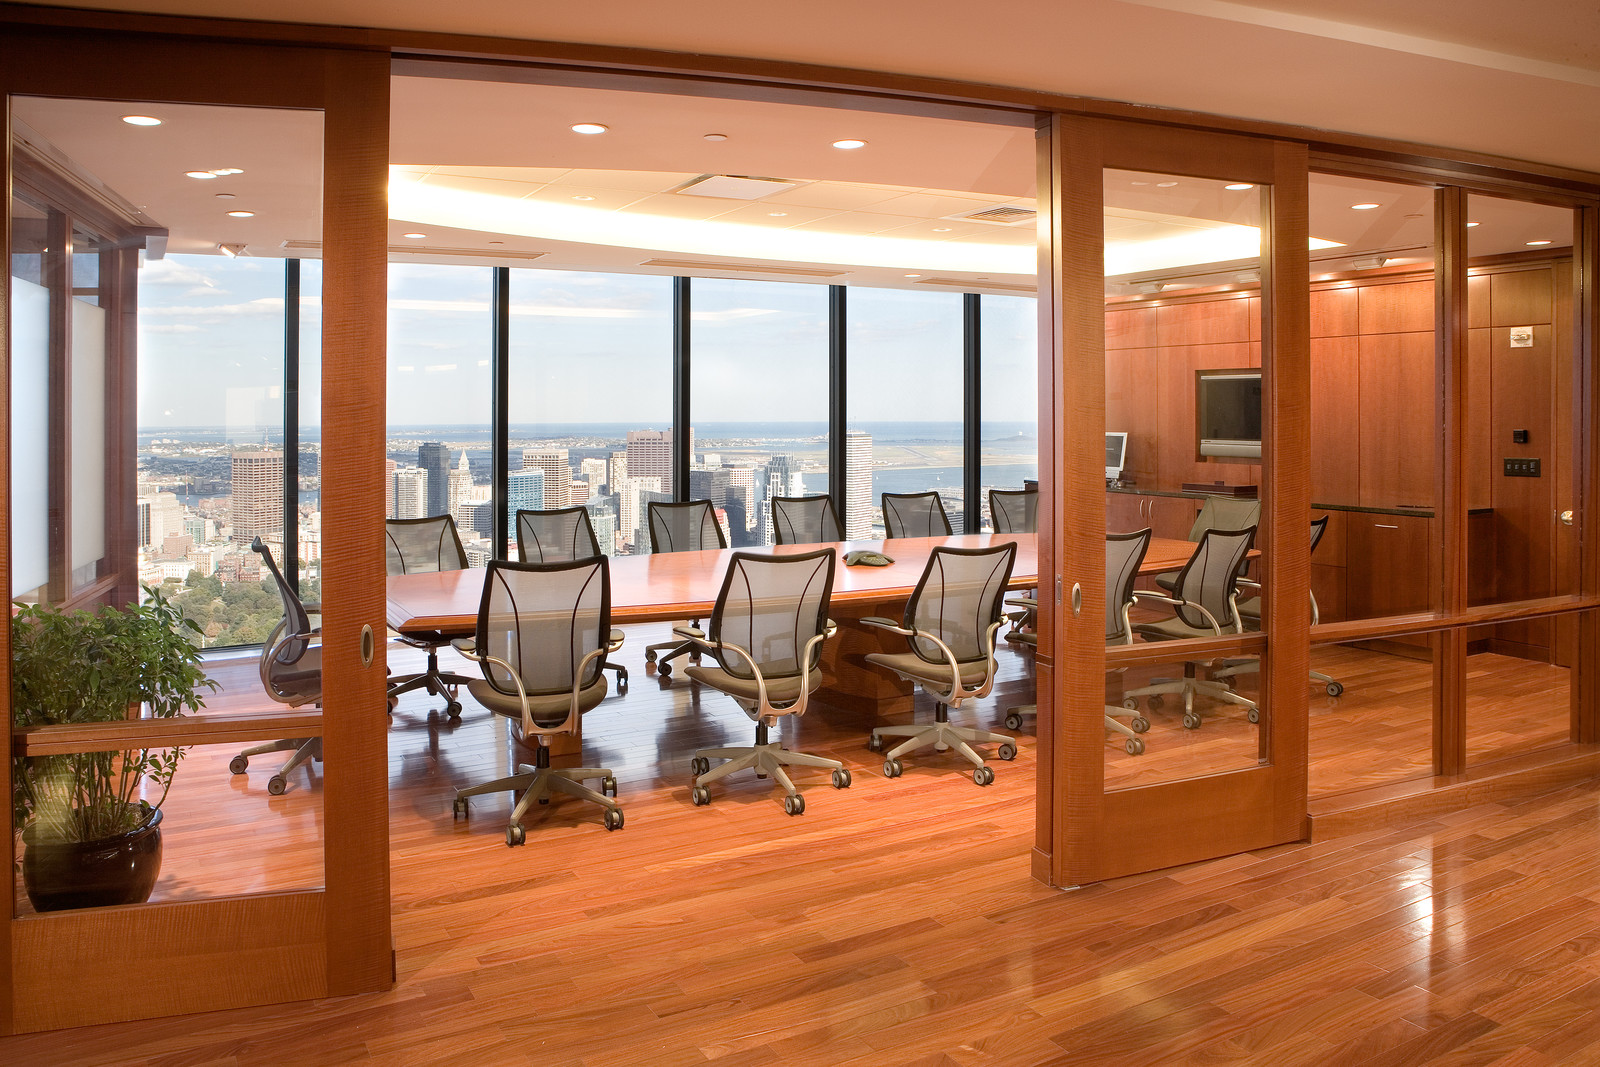 The sliding doors, conference table, wall panels and built-in credenza make this conference room a real centerpiece.